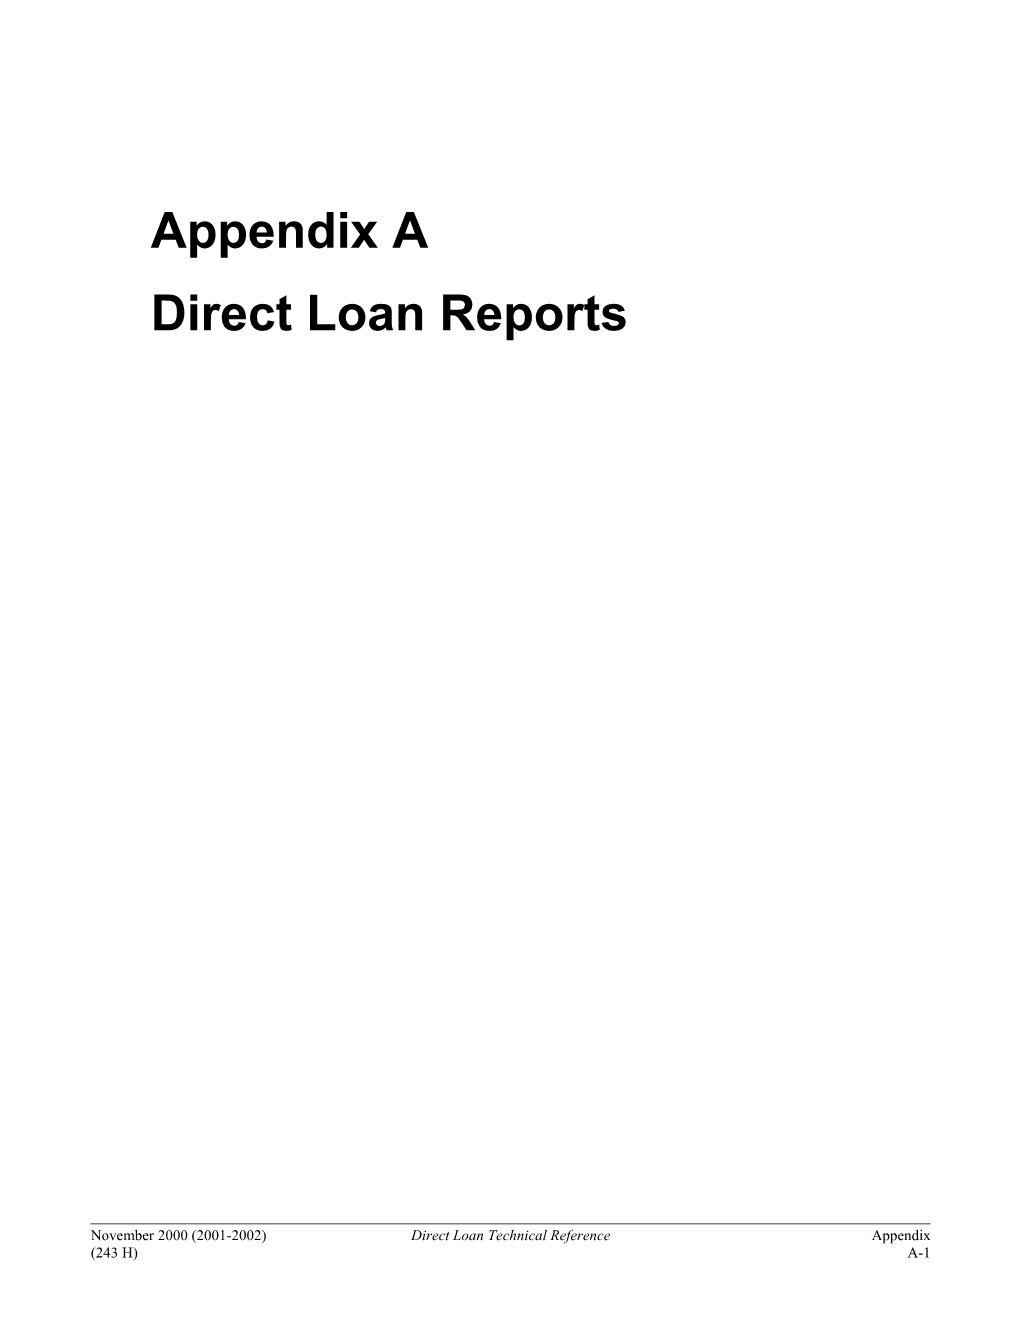 Section A: Direct Loan Reports